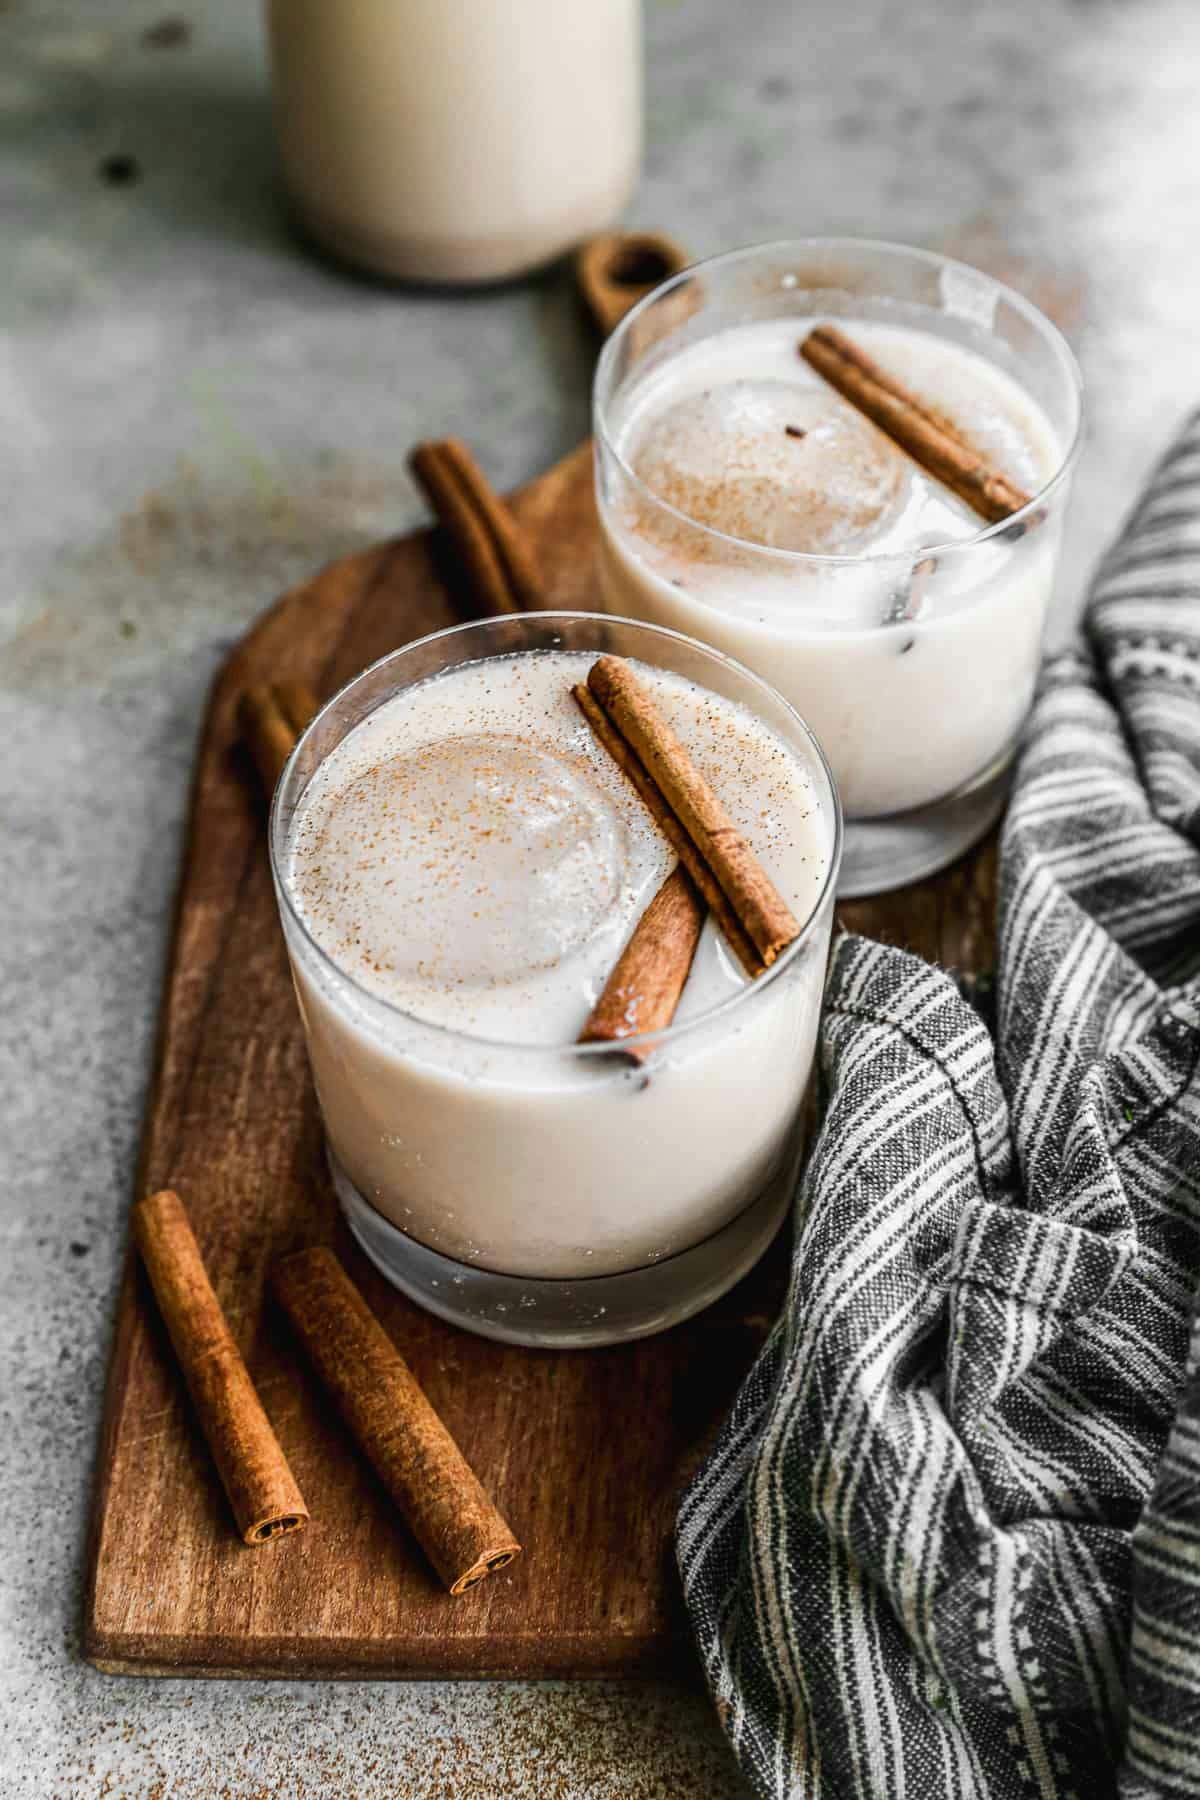 Horchata served with cinnamon sticks in a clear glass